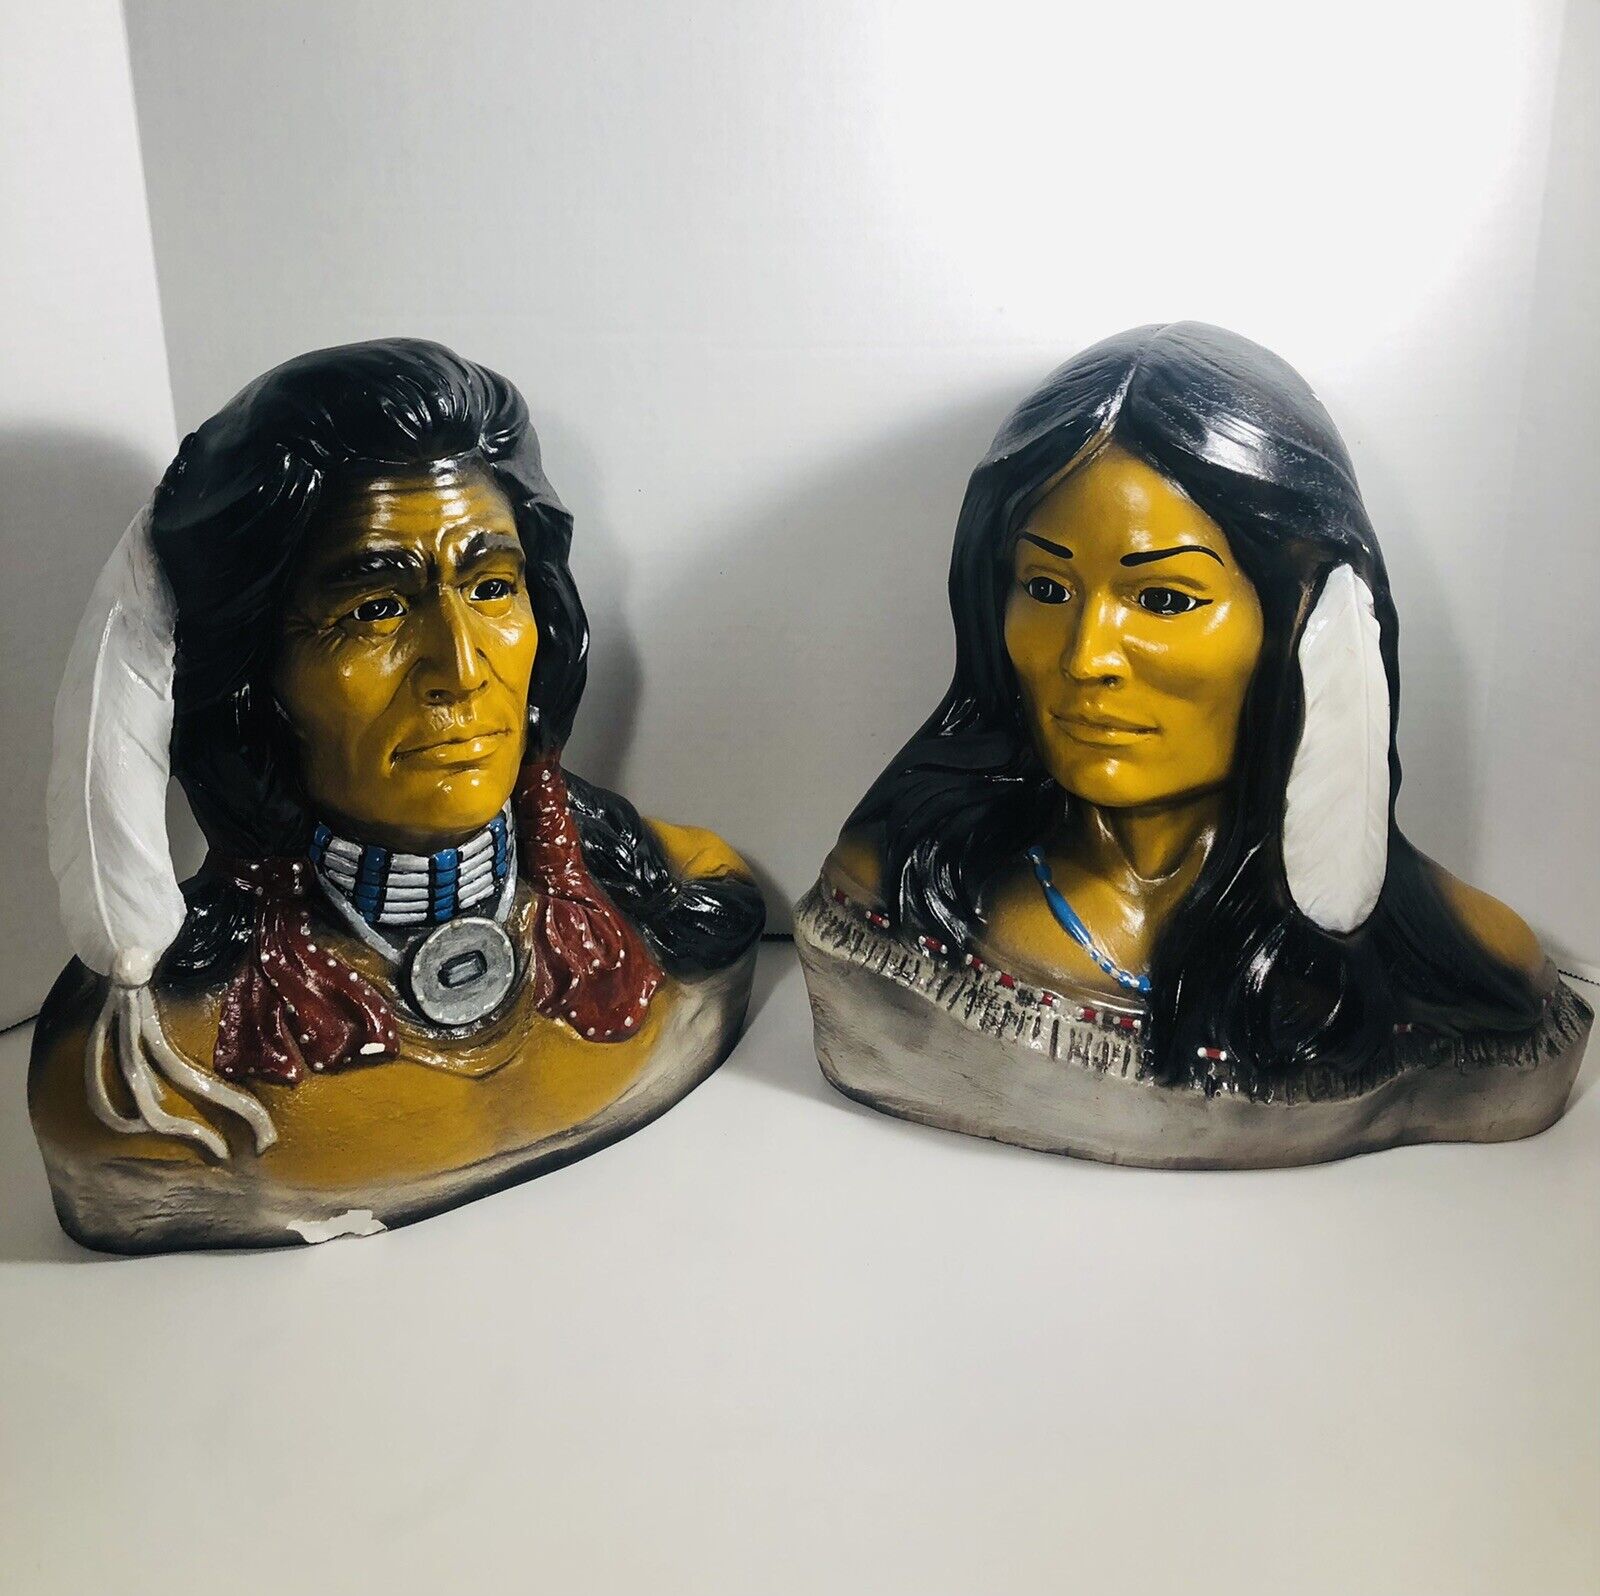 Beautiful Pair of Indigenous People Man & Woman bust statues - HARD TO FIND